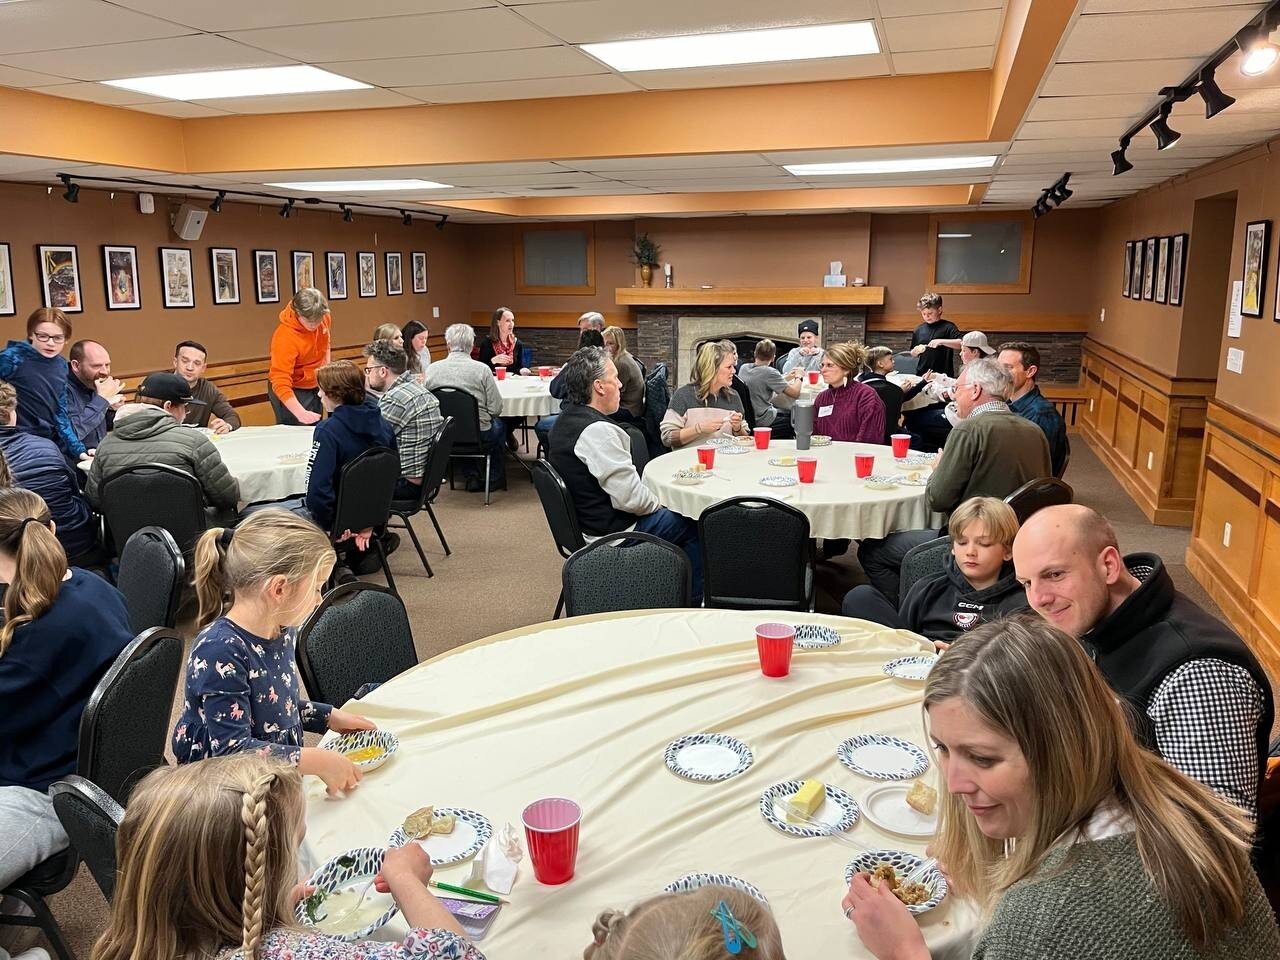 Our Lenten soup supper felt like a family kind of night. 🥰 About 40 of us gathered to share plenty of soup, pray through Evening Prayer, and sing worship songs. ⁠
⁠
Can you believe this event happened nearly two weeks ago? Now, we're less than two w